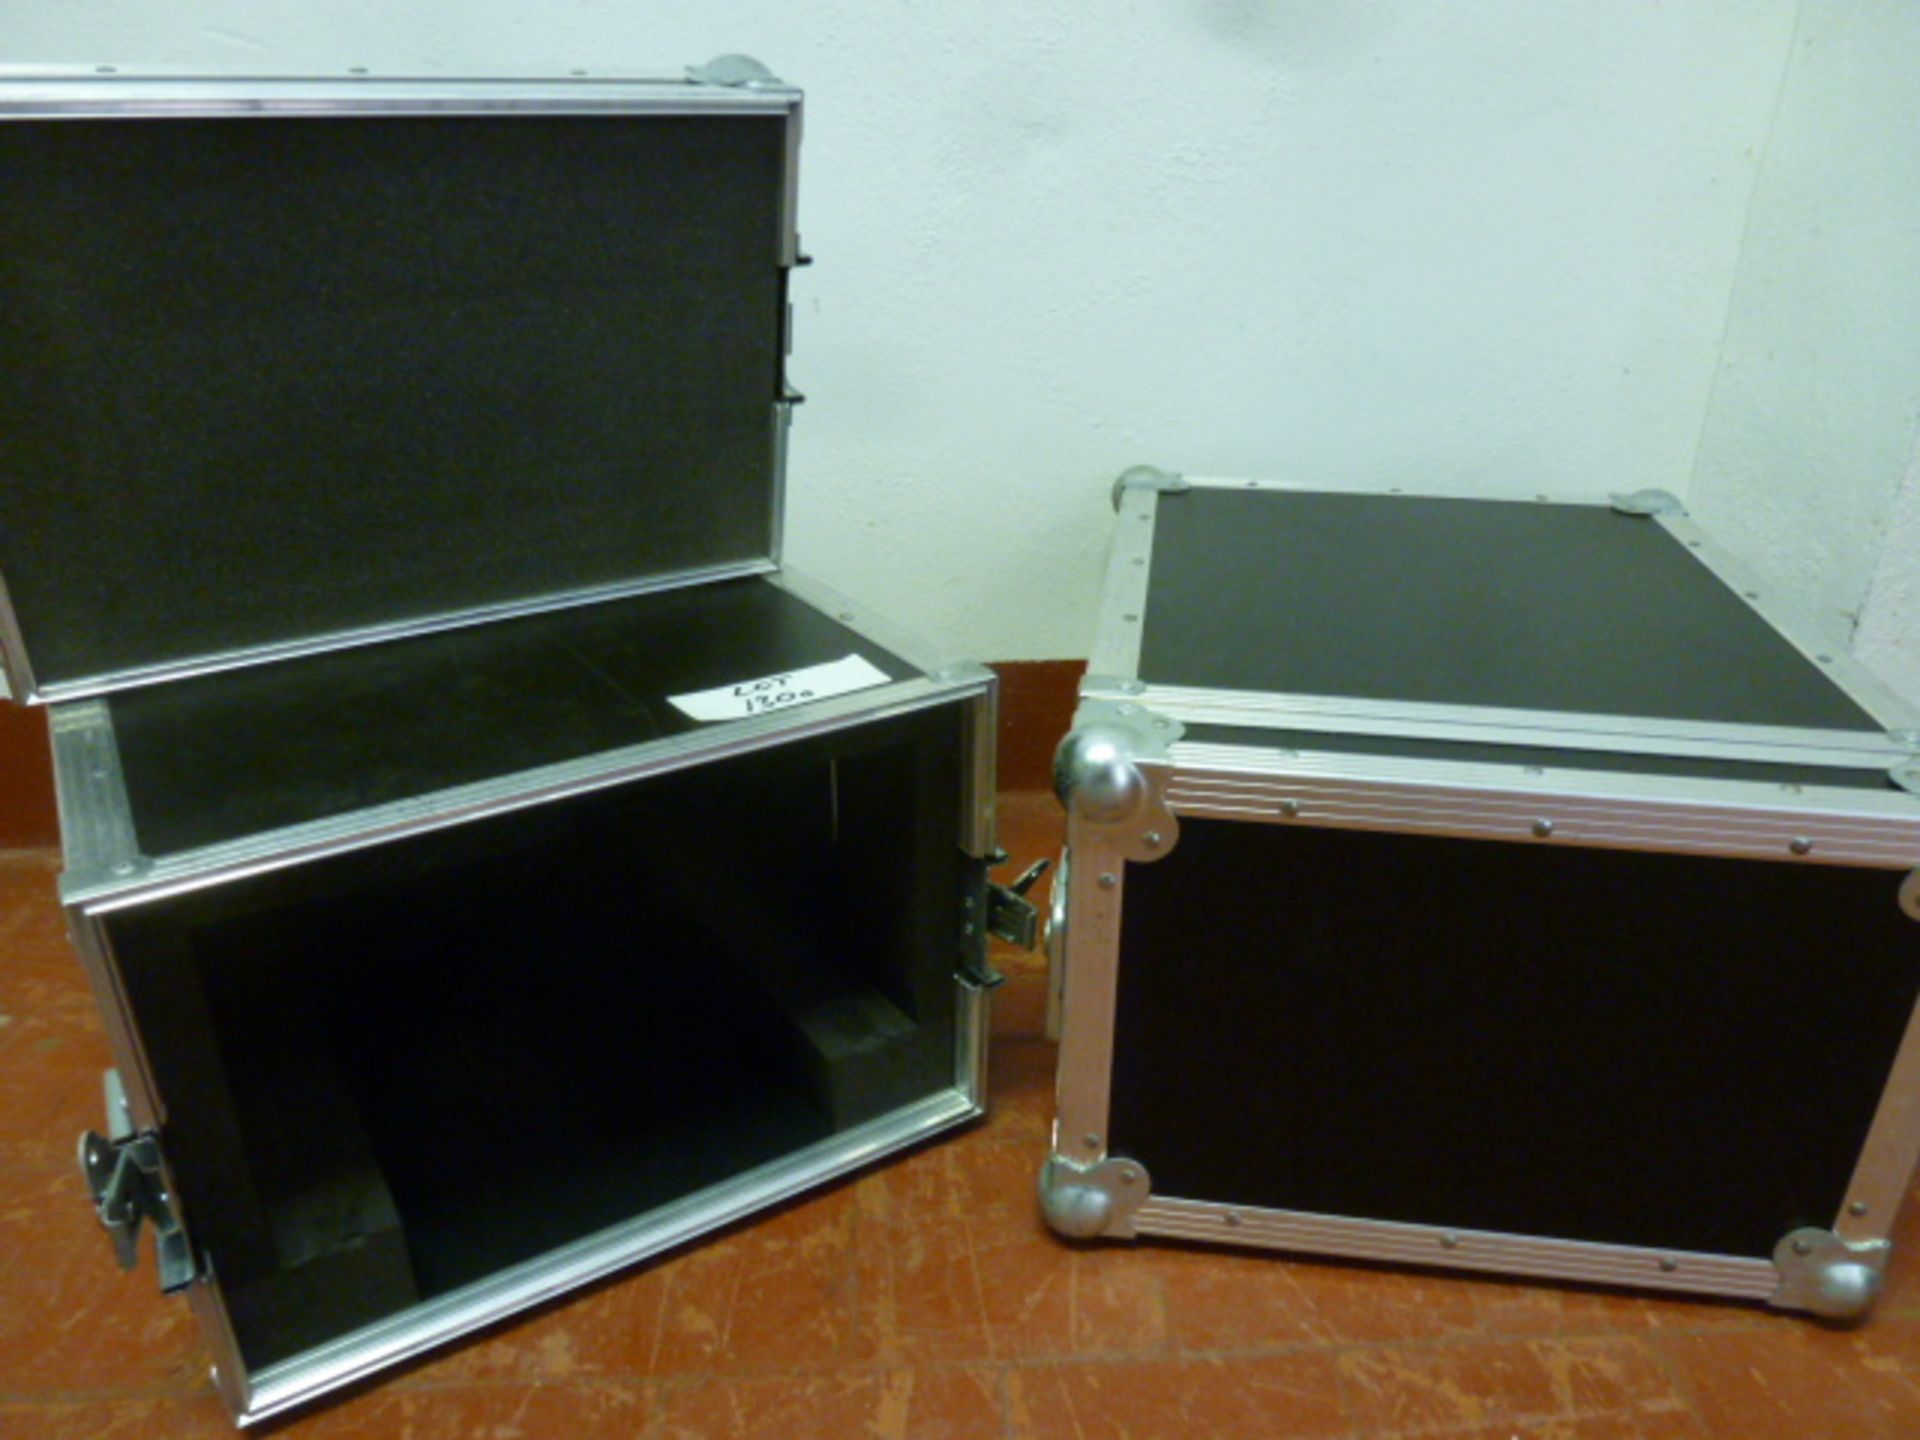 2 x Unbranded Vented Flight Cases. Size (H)27 x (D)50 x (W)40.